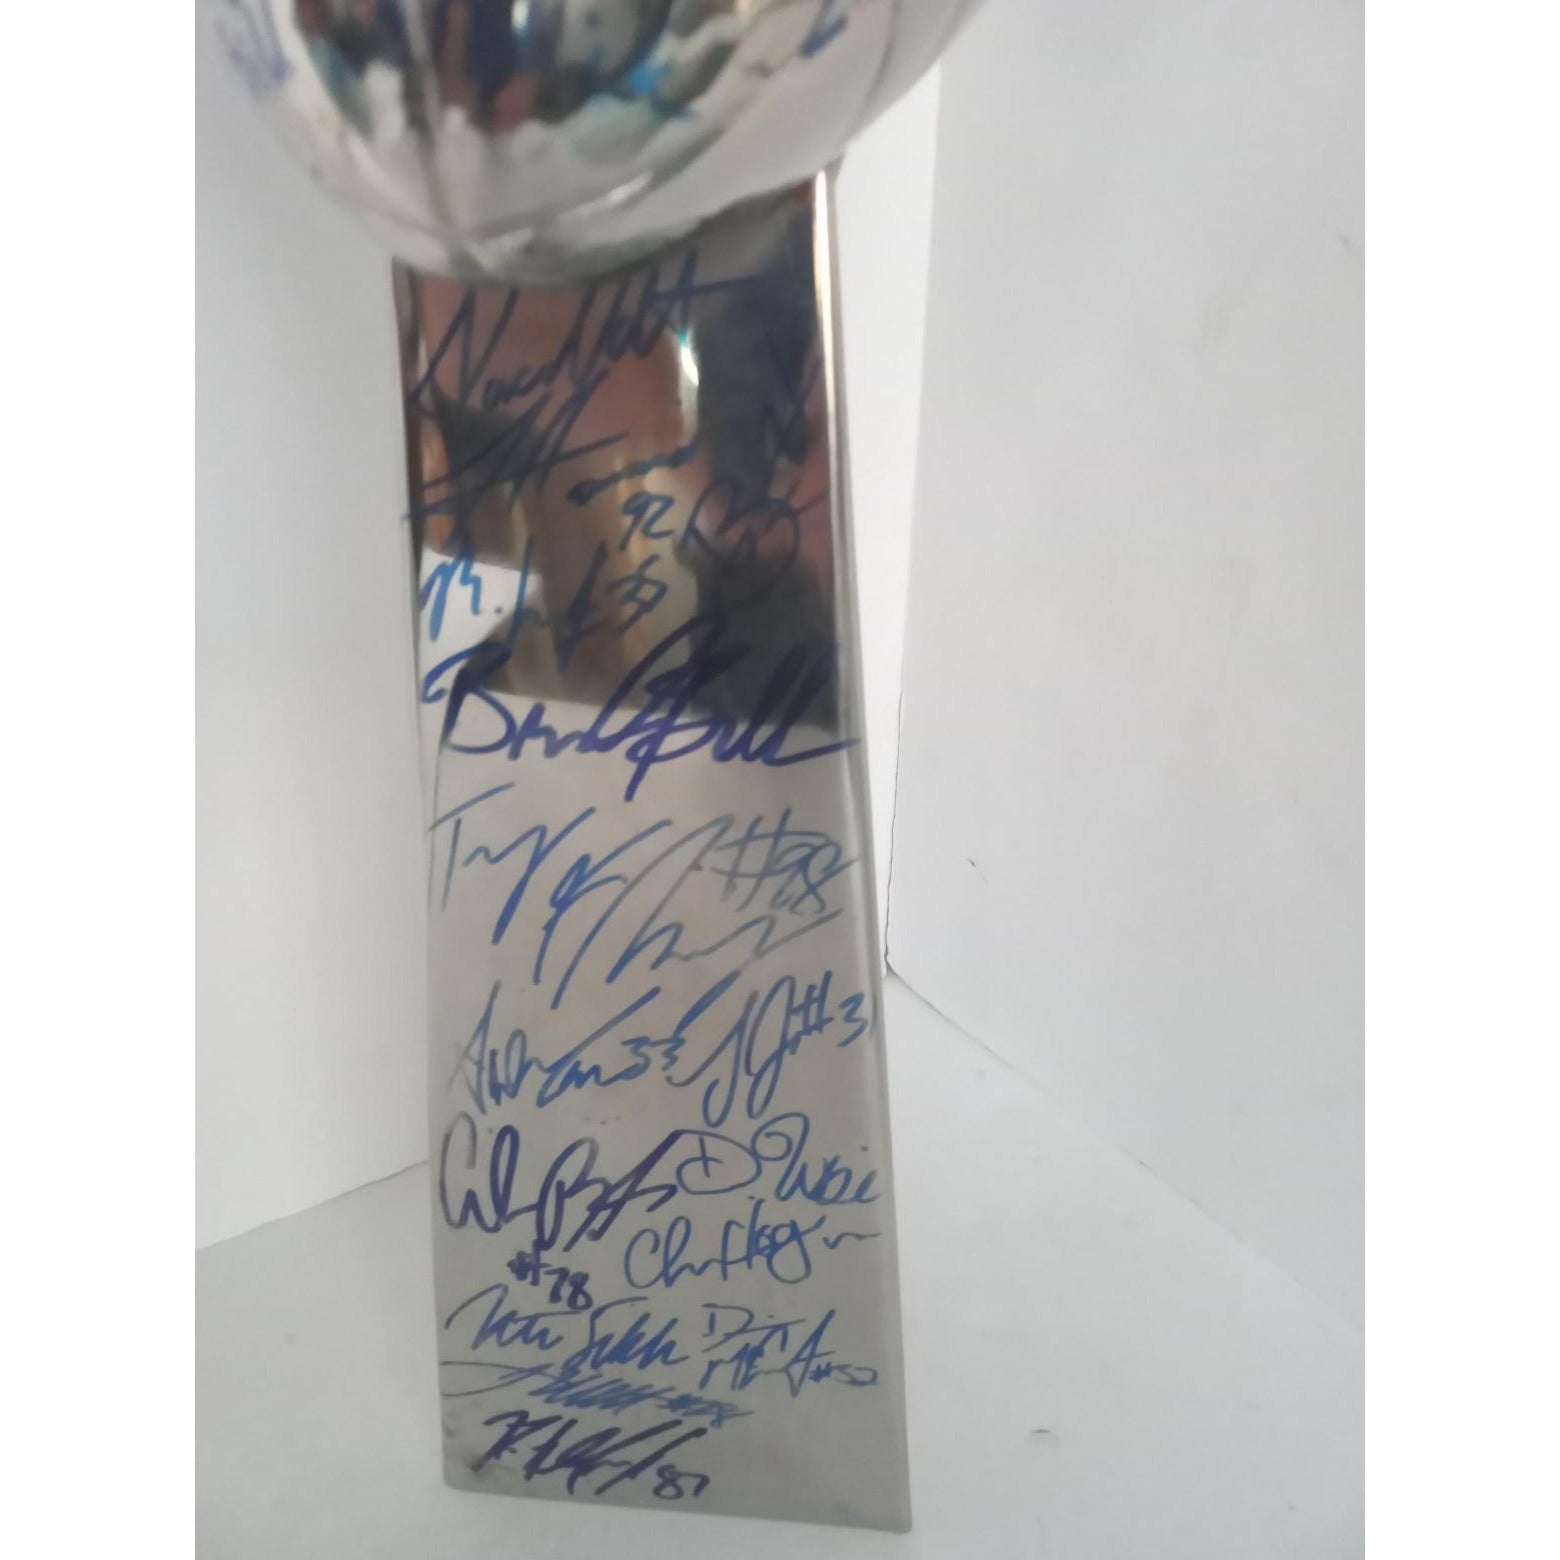 New England Patriots Super Bowl Champs Tom Brady Rob Gronkowski Bill Belichick signed Lombardi trophy with proof